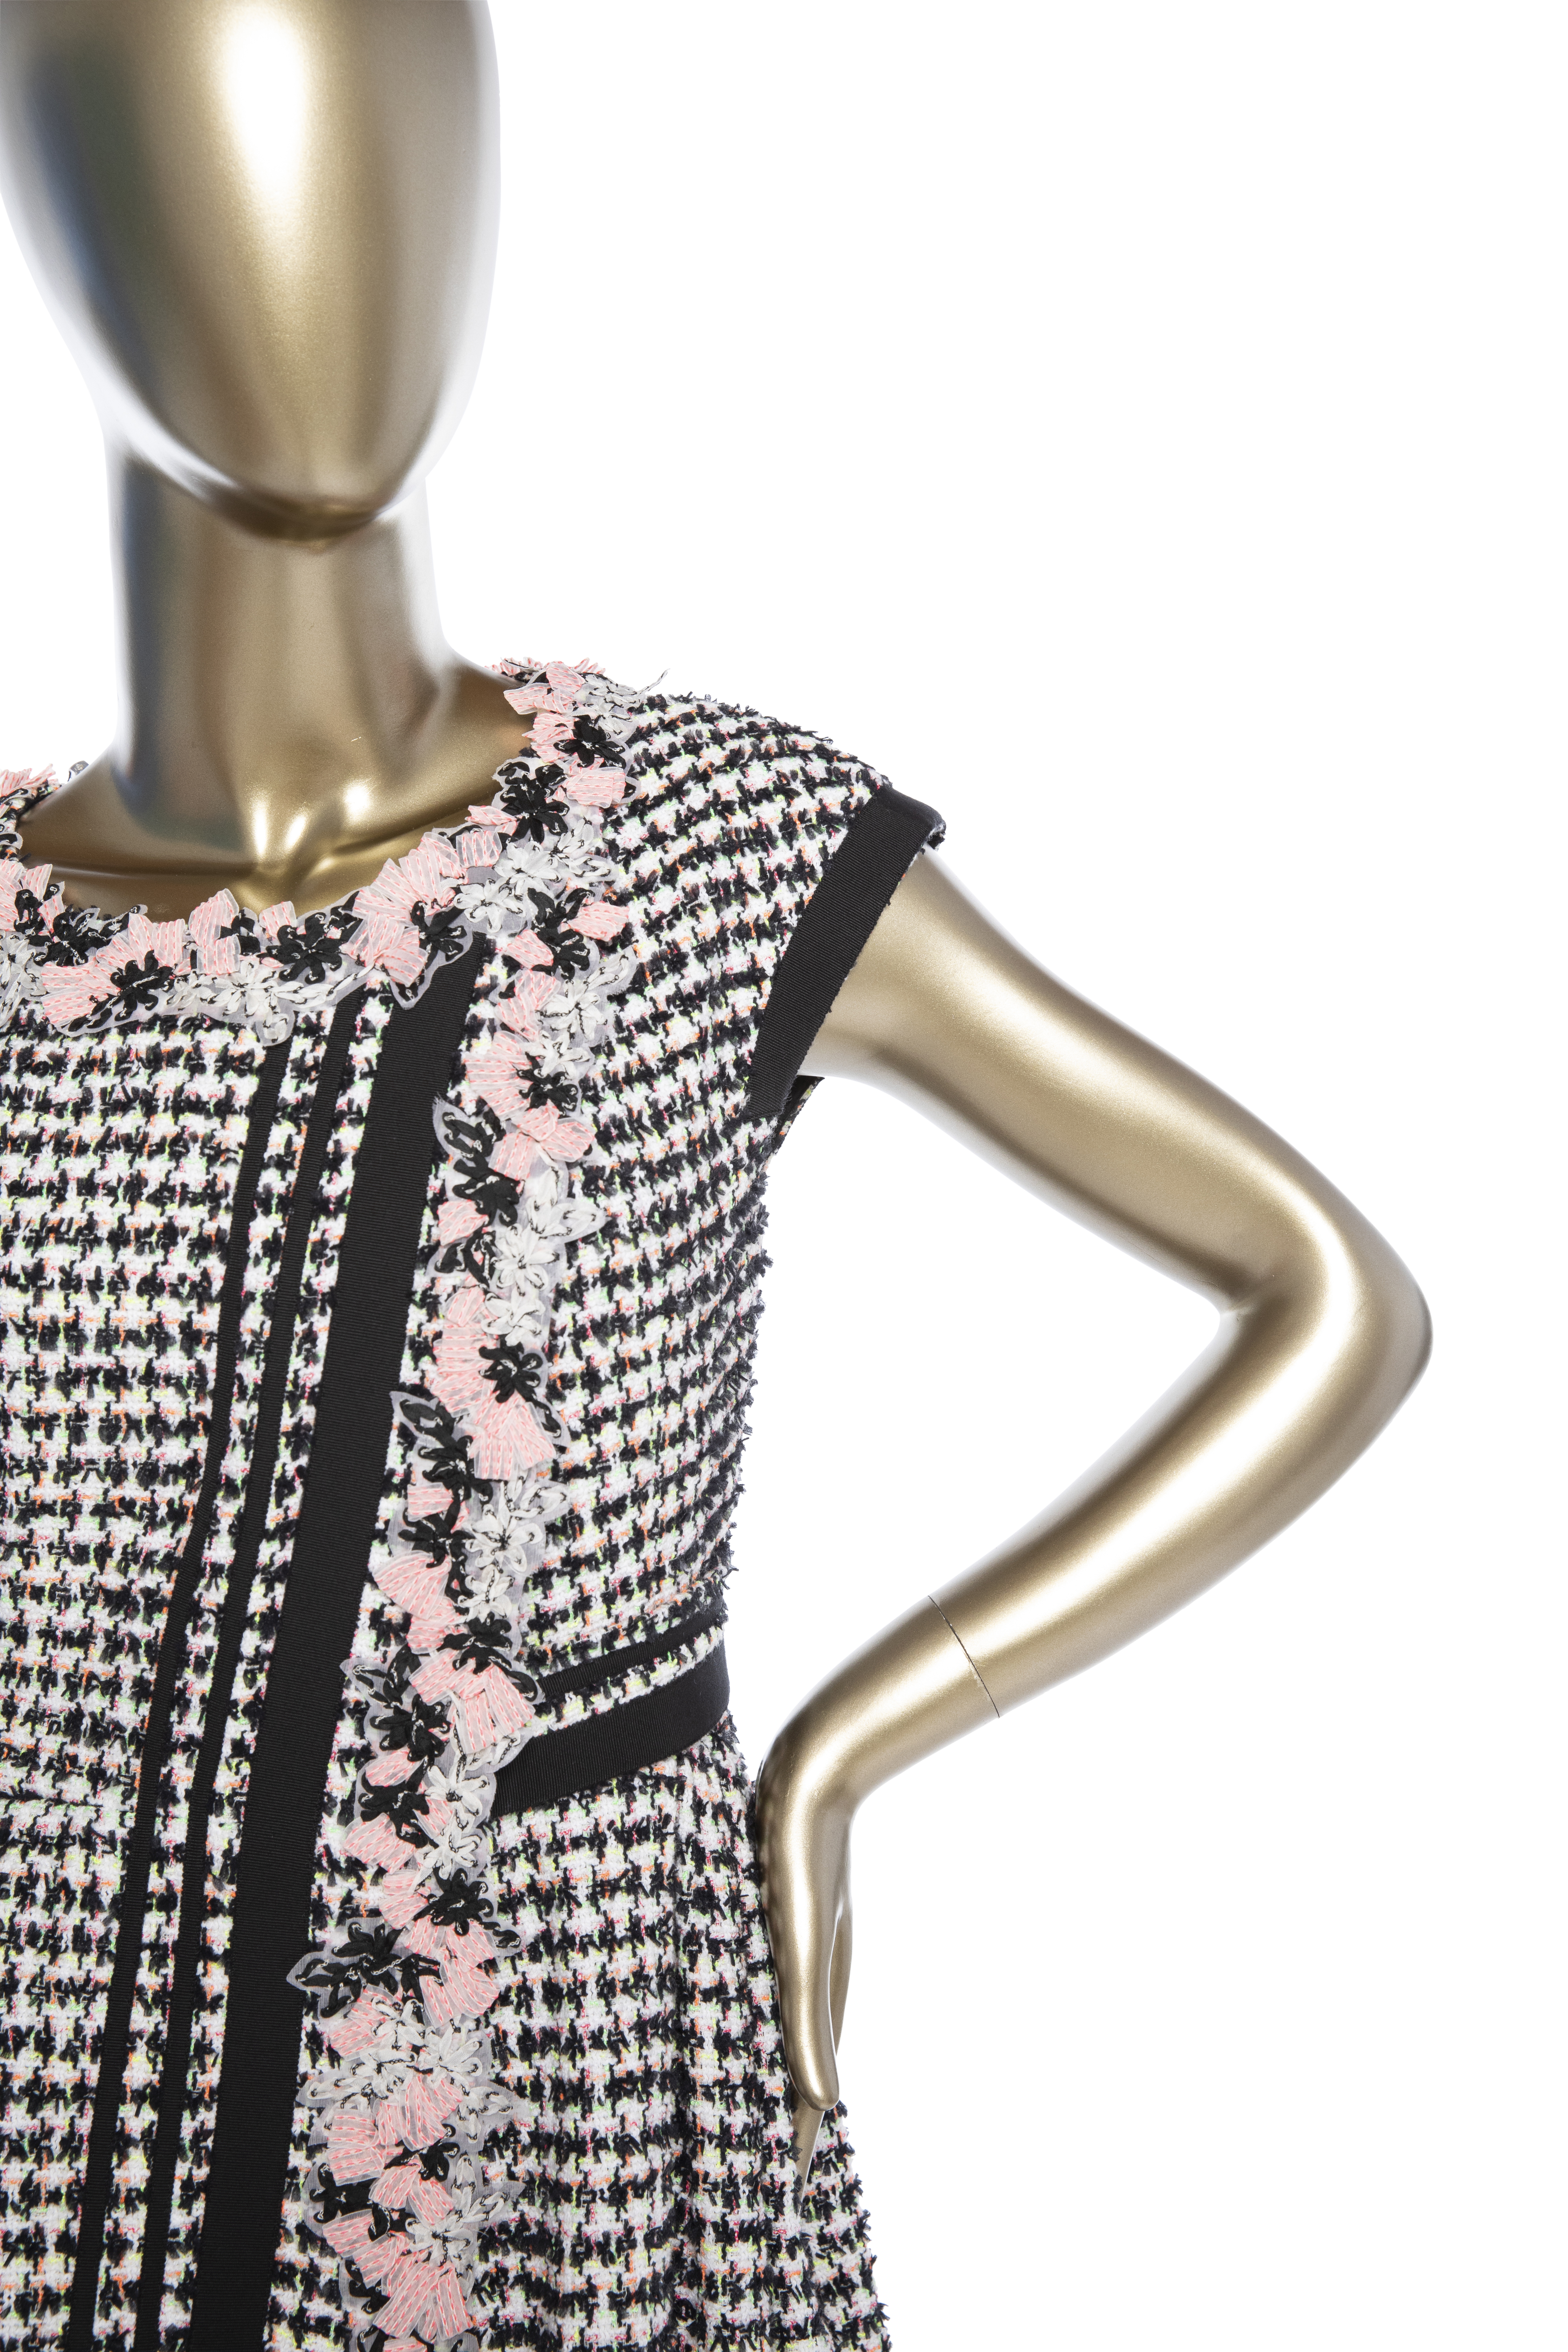 Chanel Floral-Embroidered Tweed Dress